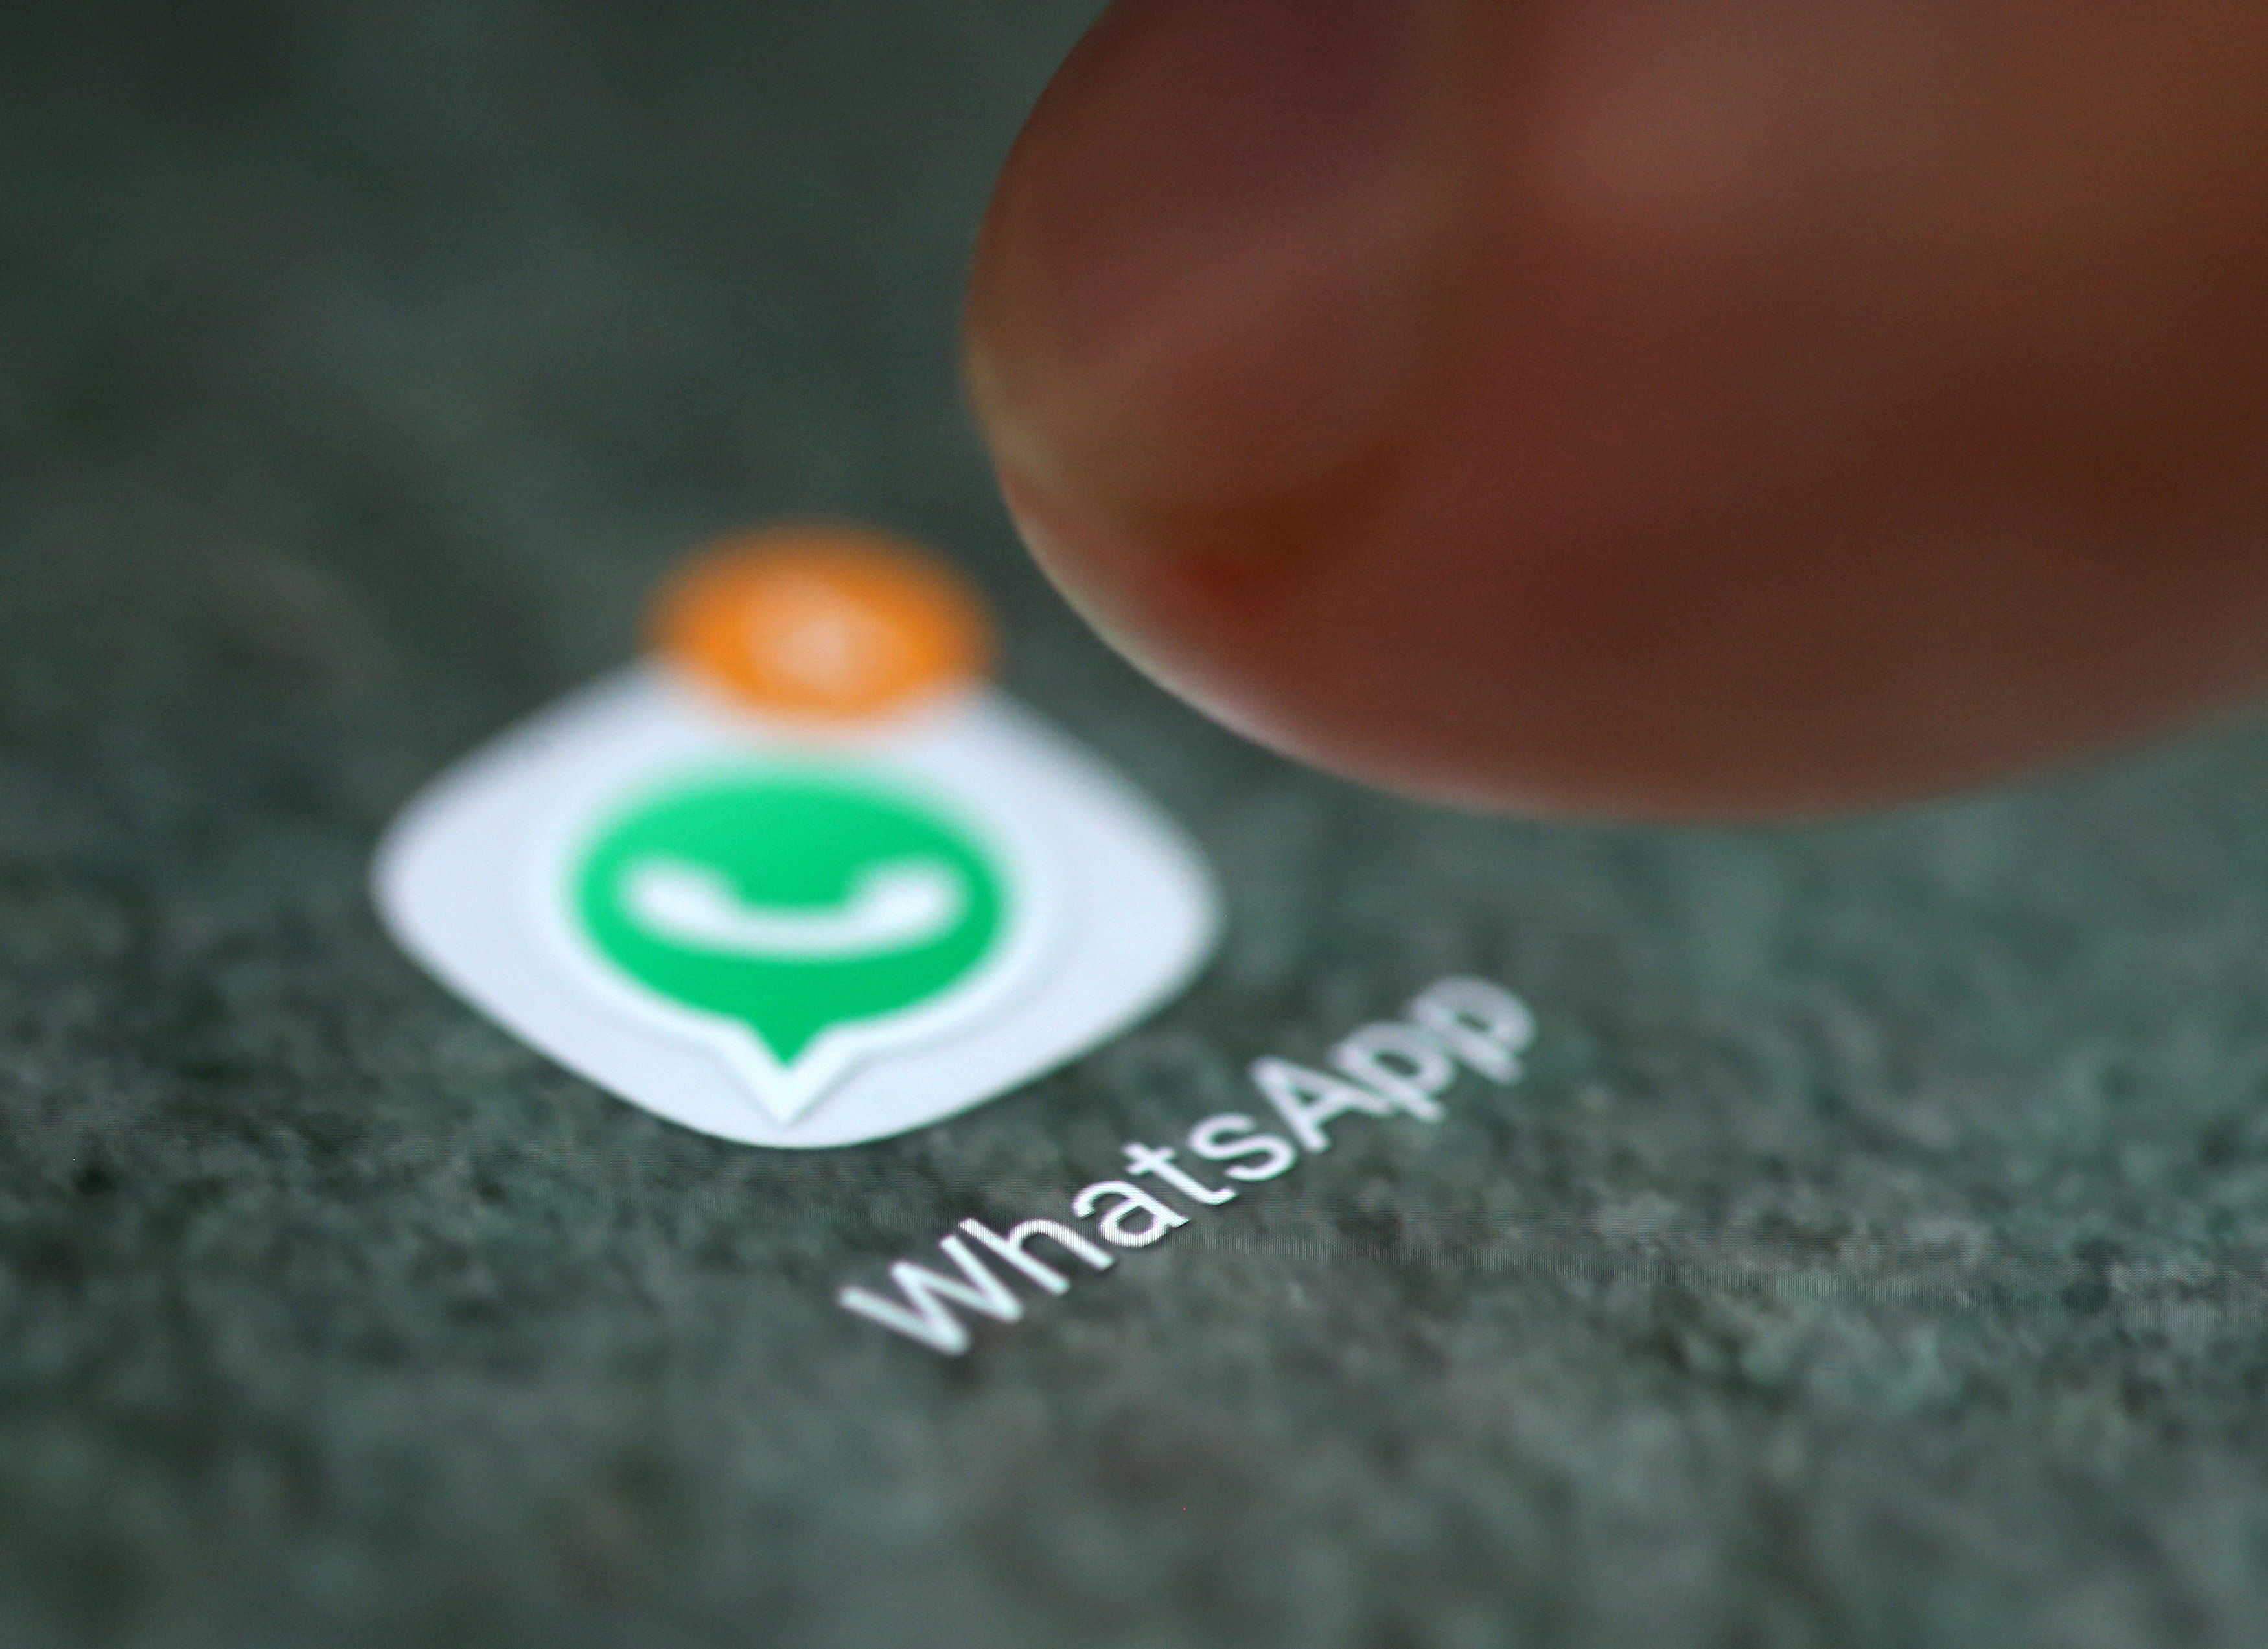 WhatsApp on iPhone (Reuters File Photo)